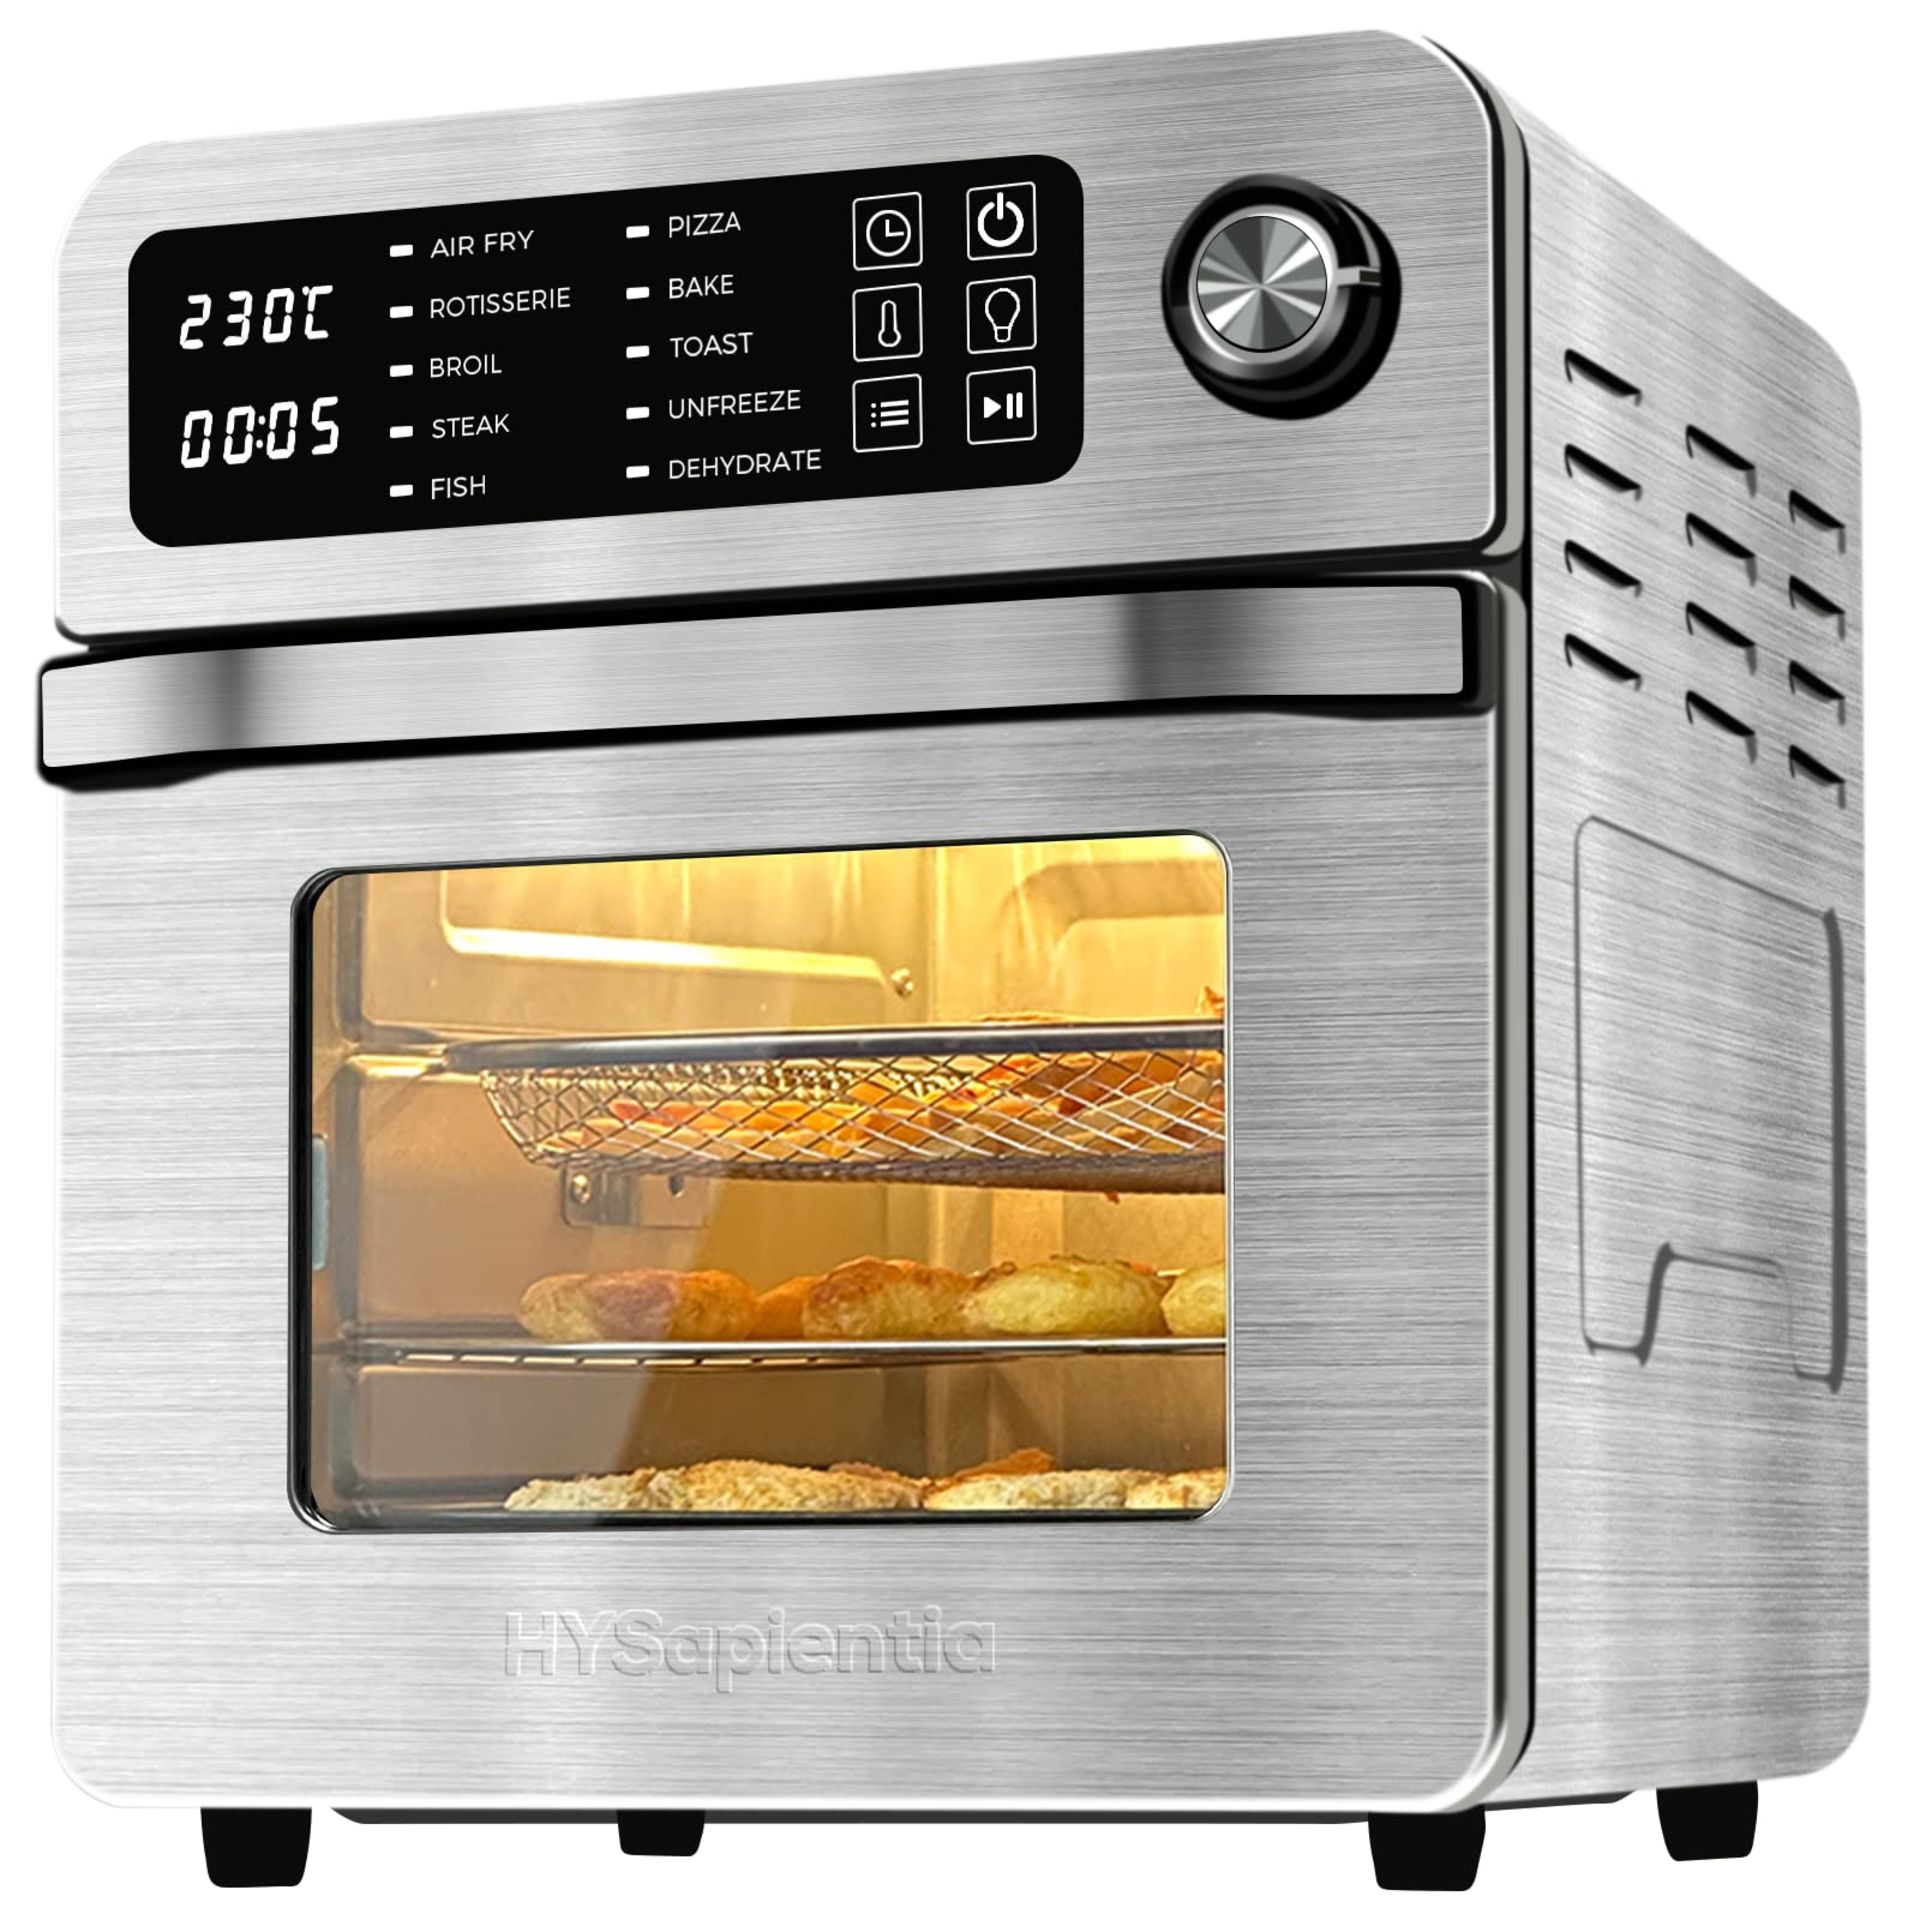 RRP £155.25 HYSapientia Large Air Fryers Oven 15L With Rotisserie